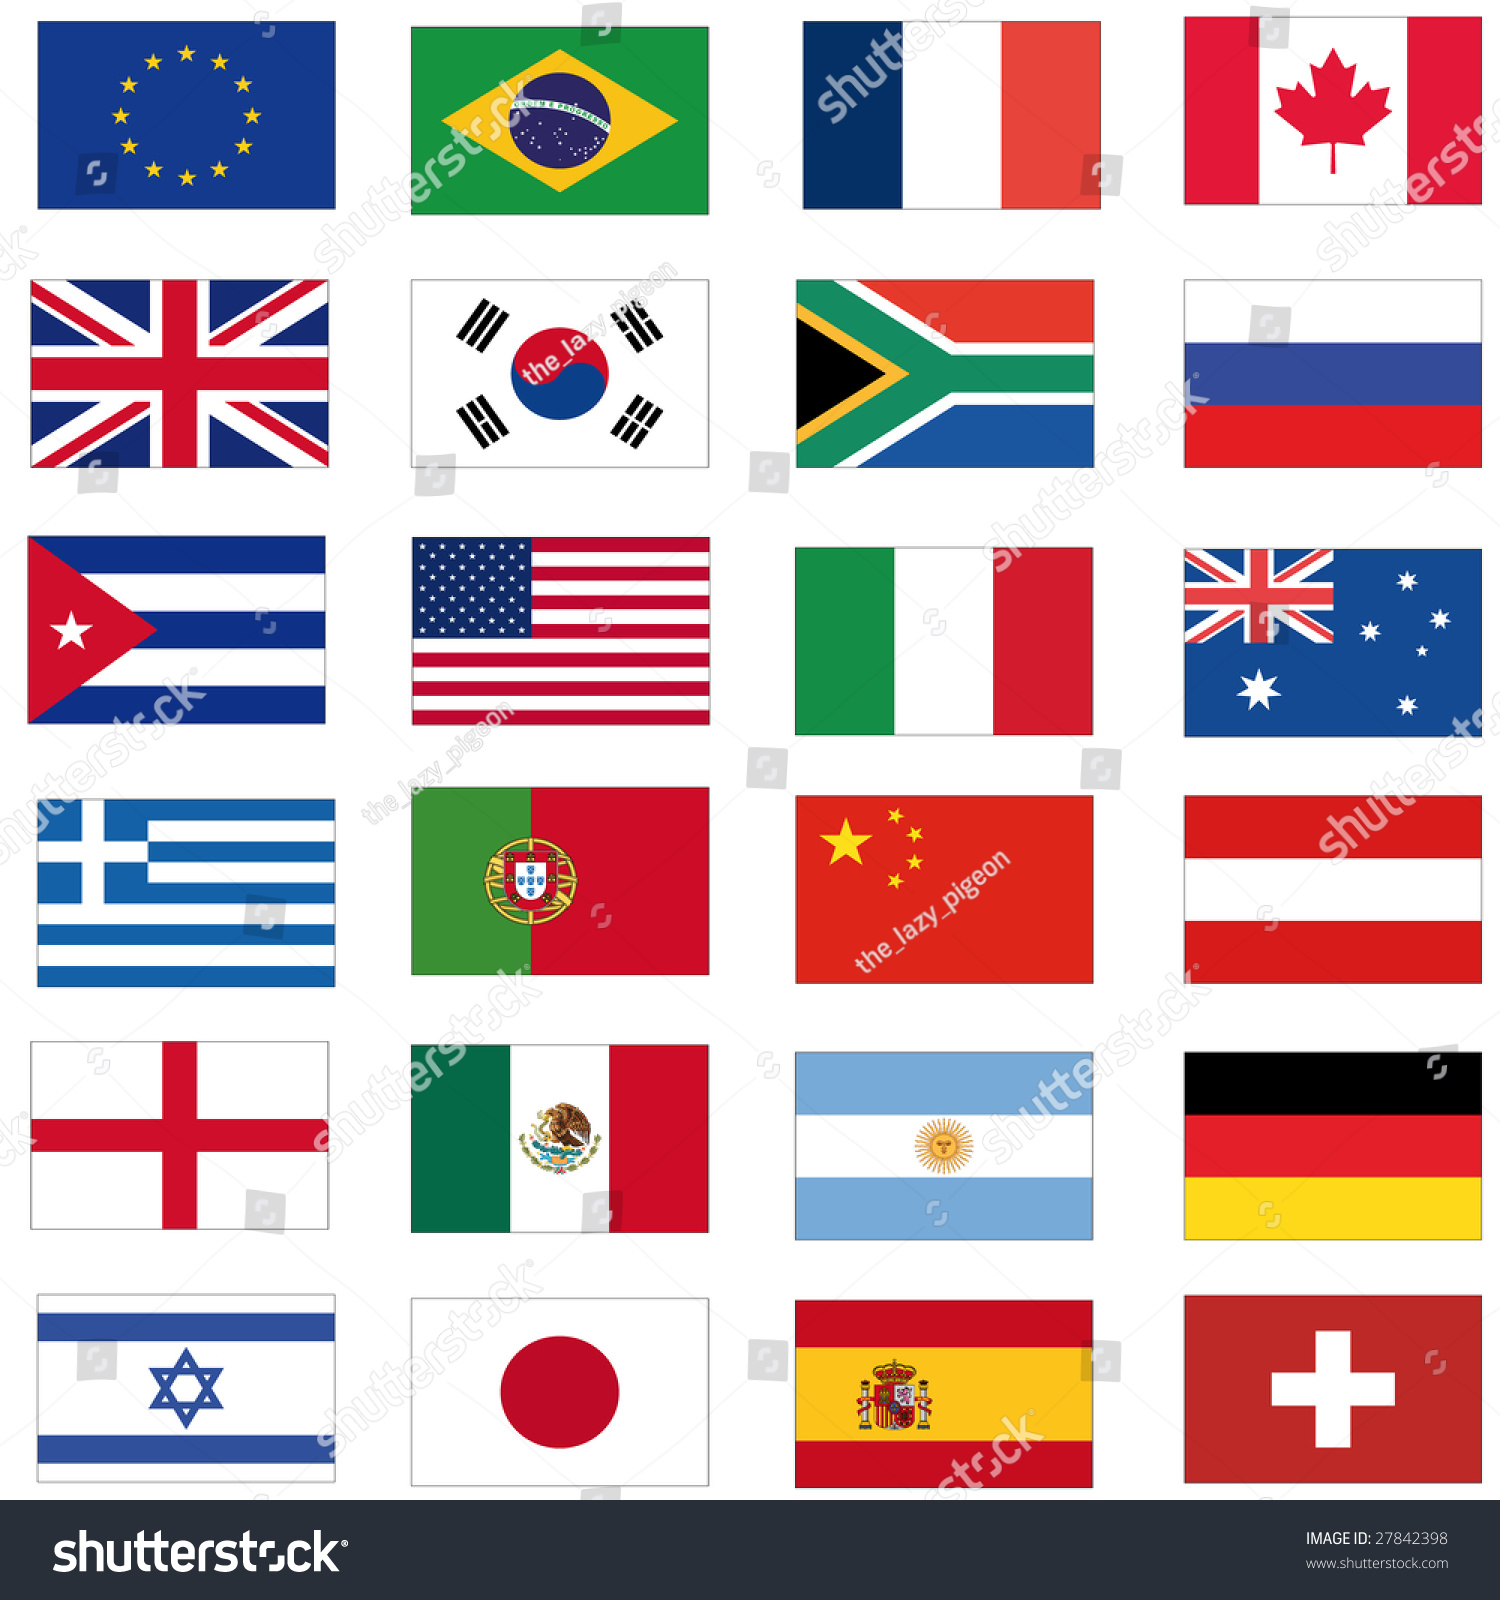 Set Most Important Flags Stock Illustration 27842398 - Shutterstock